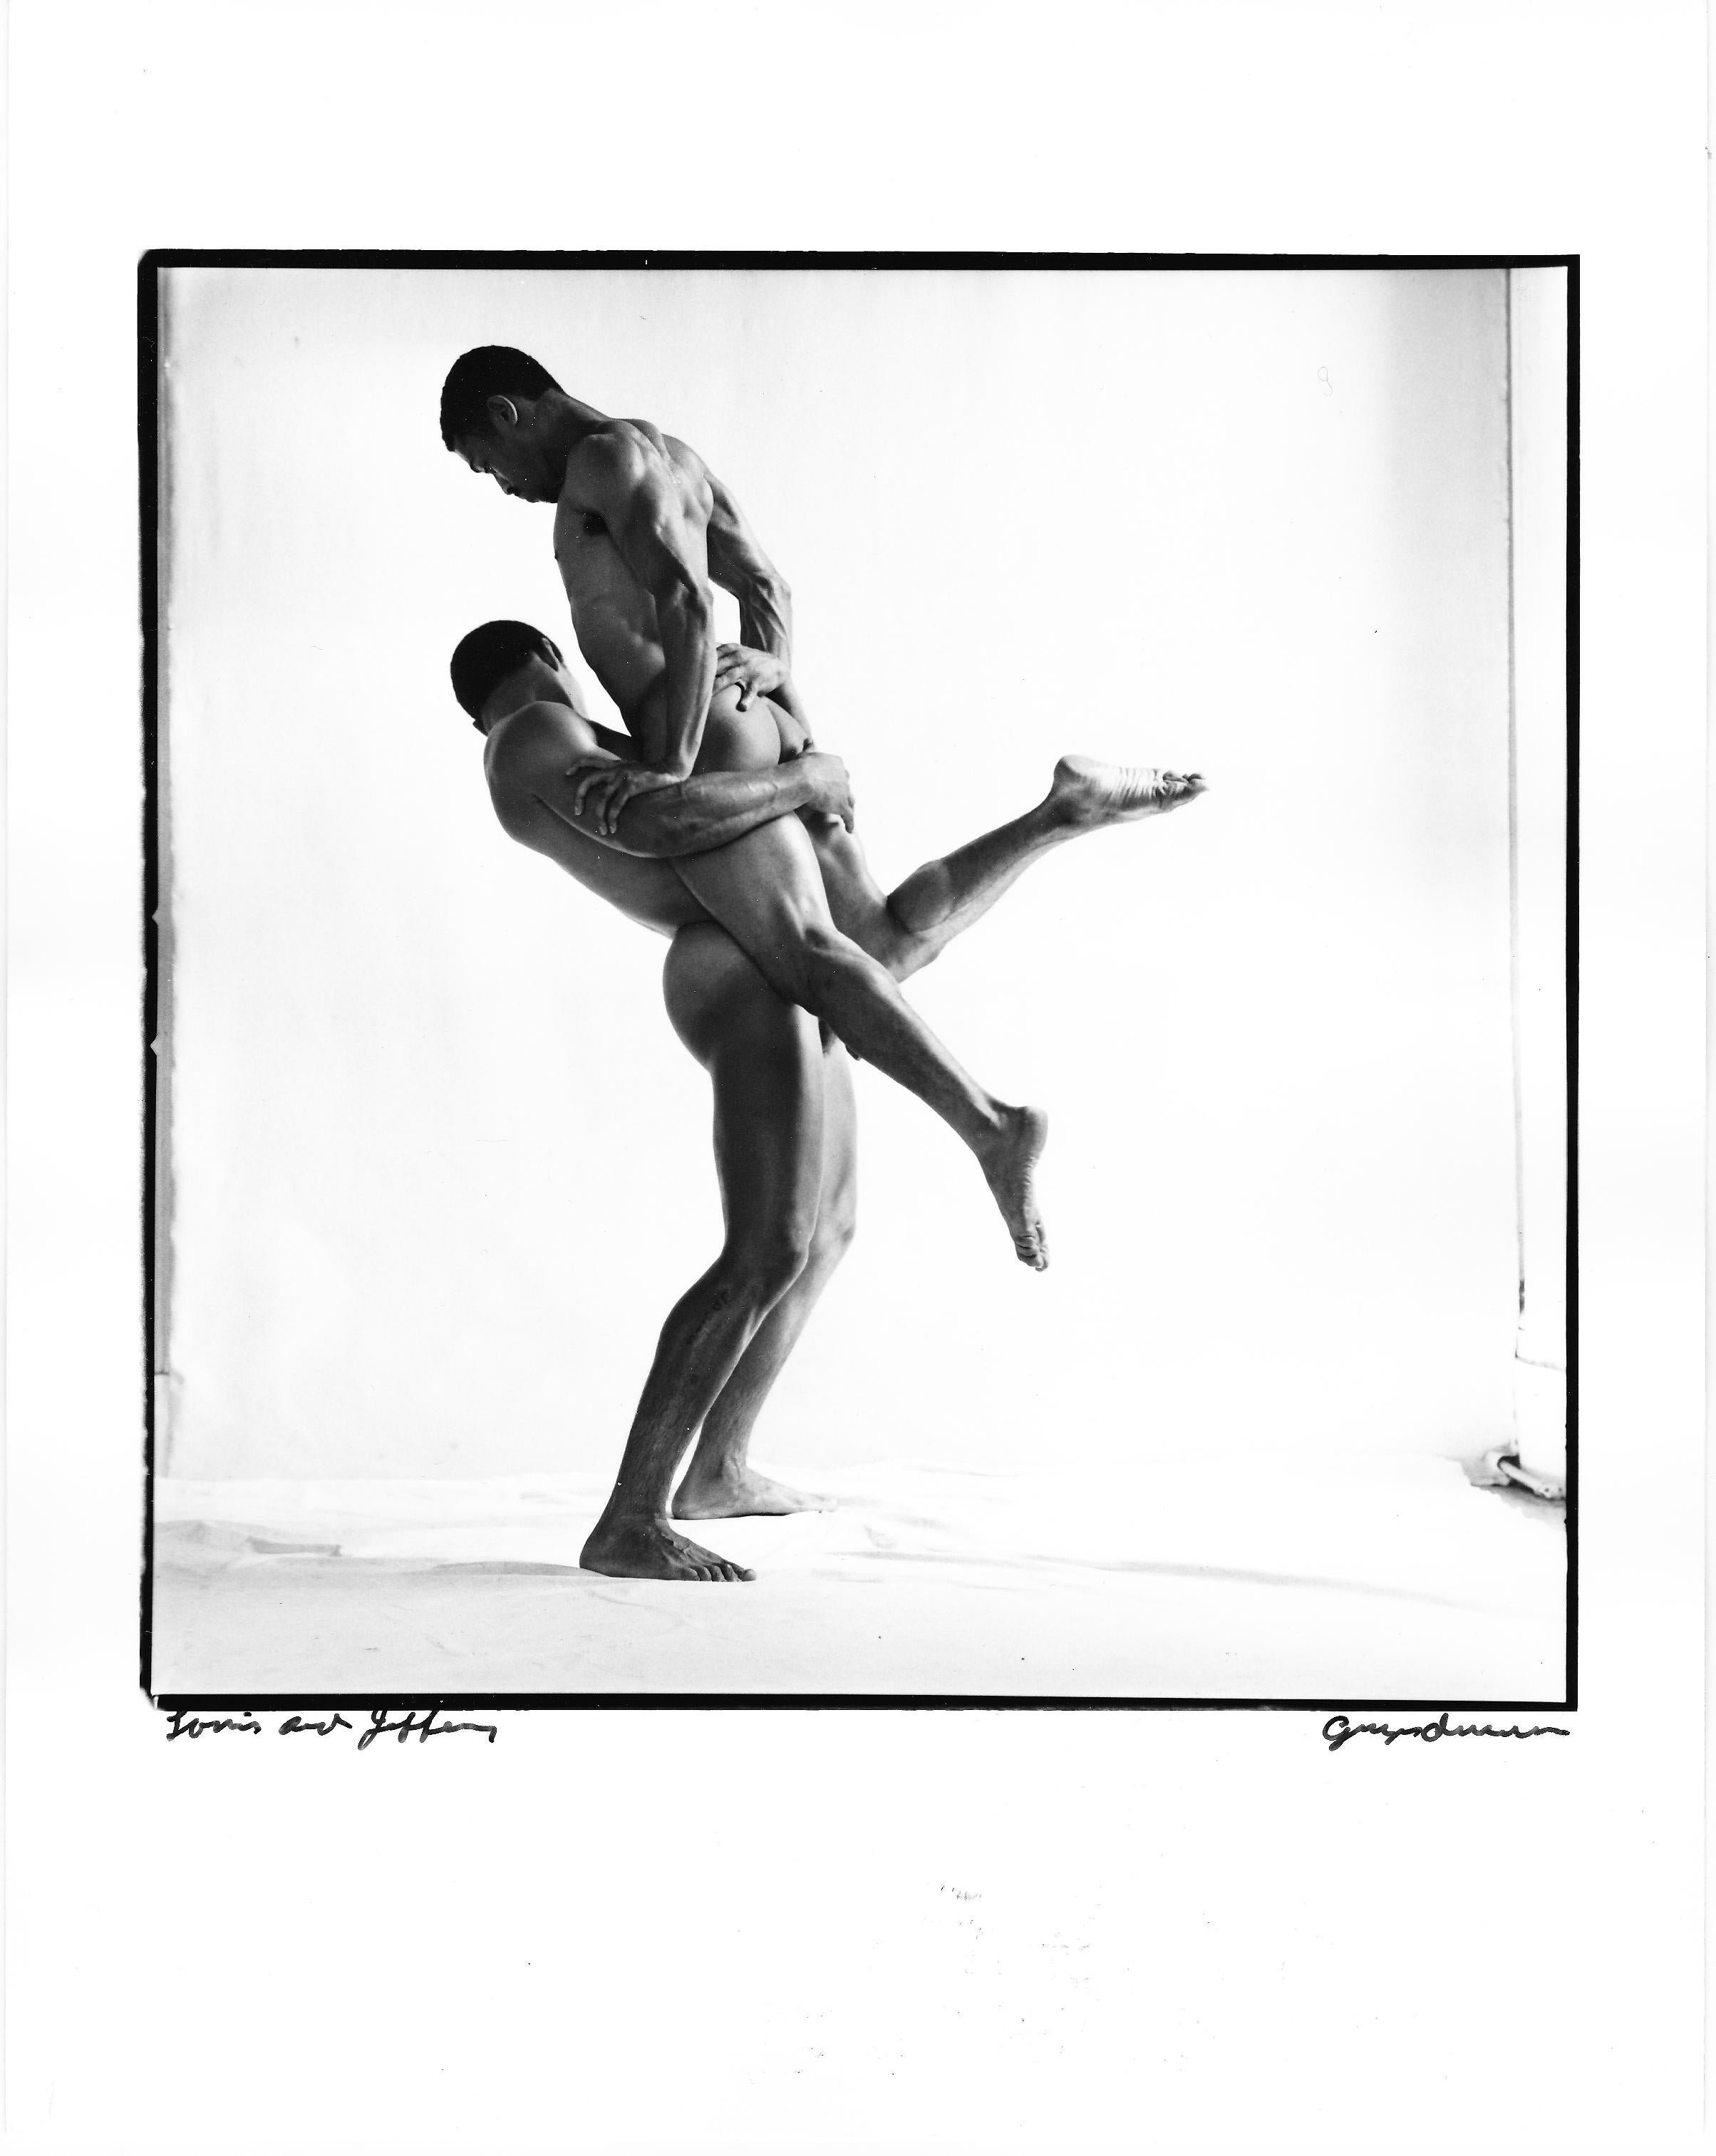 George Dureau Nude Photograph - Louis and Jeffrey, Male Nudes Photographed in Studio, Gelatin Silver Photography